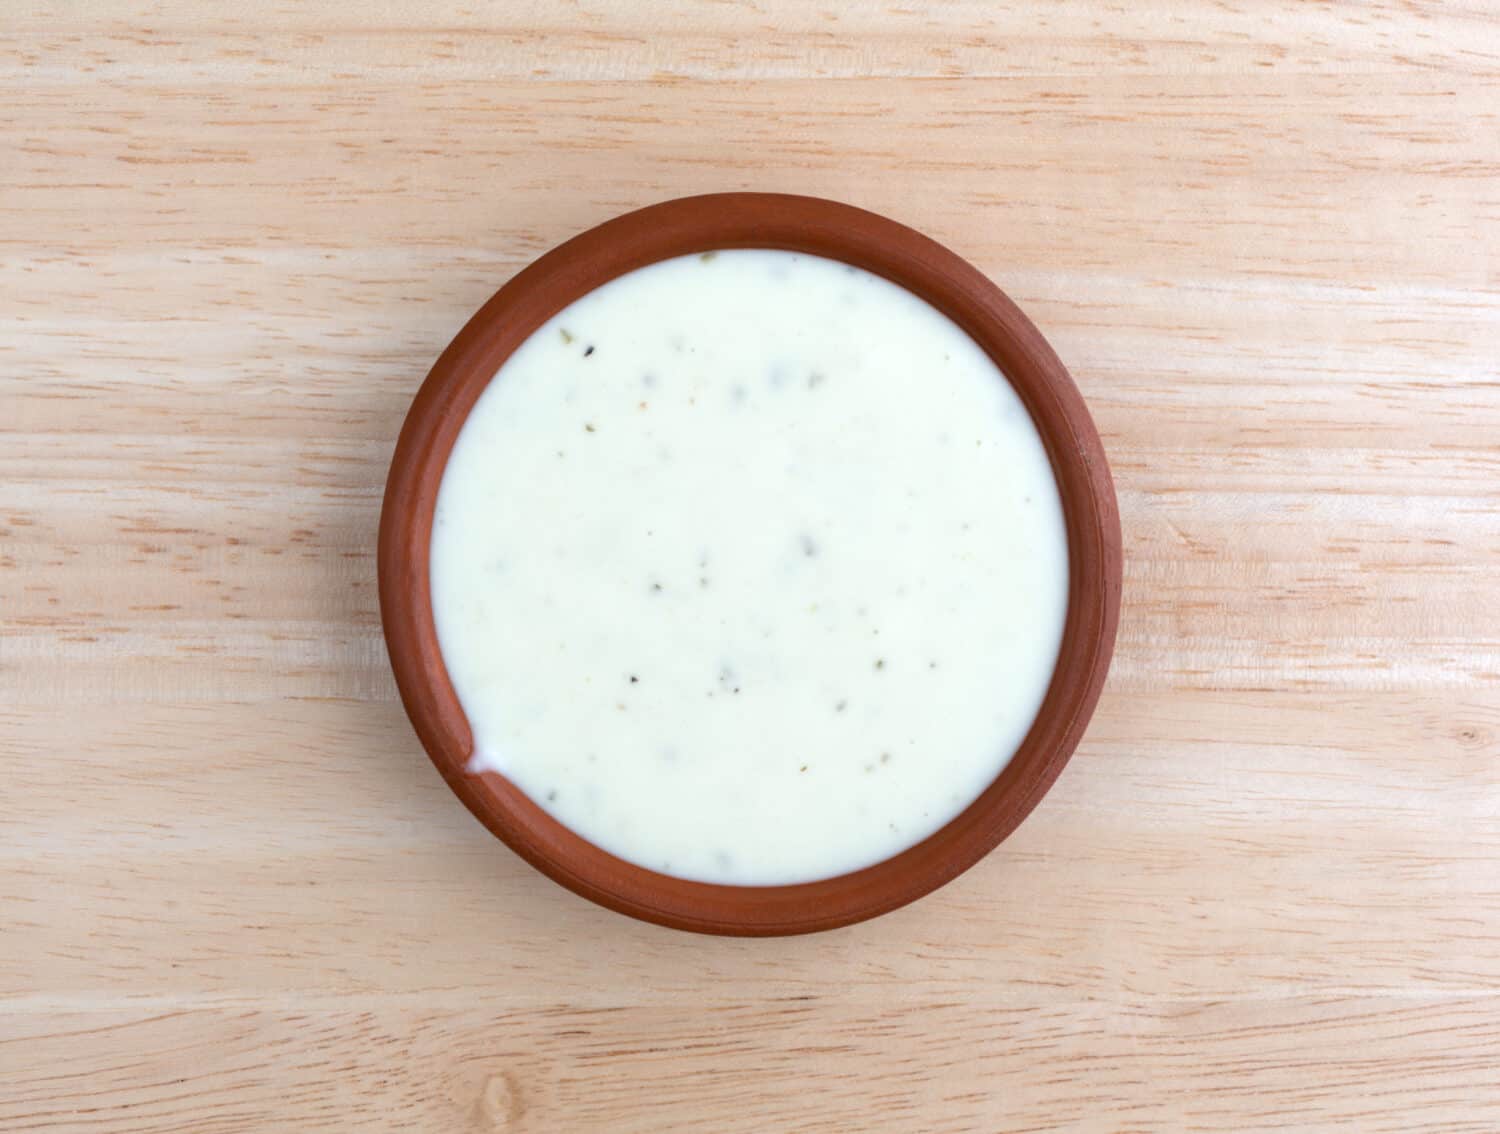 Top view of a small bowl of ranch dressing on a wood table top illuminated with natural light.